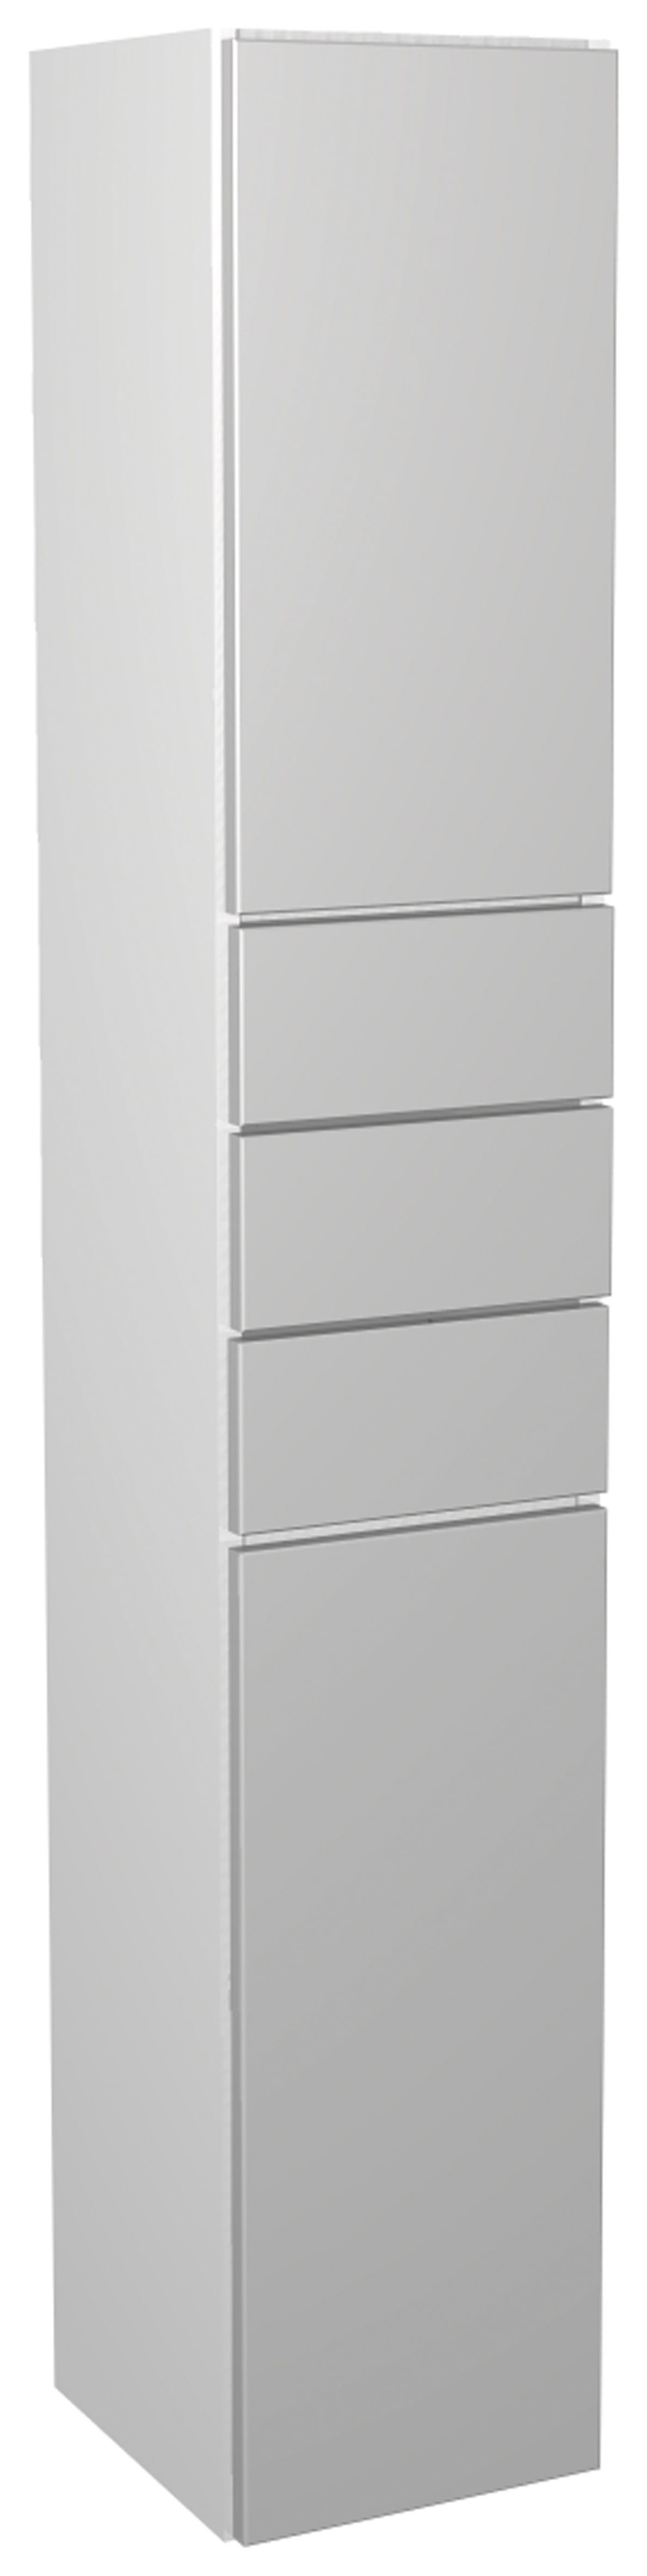 Wickes Vienna Grey Tower Unit with Drawers - 300 x 1762mm